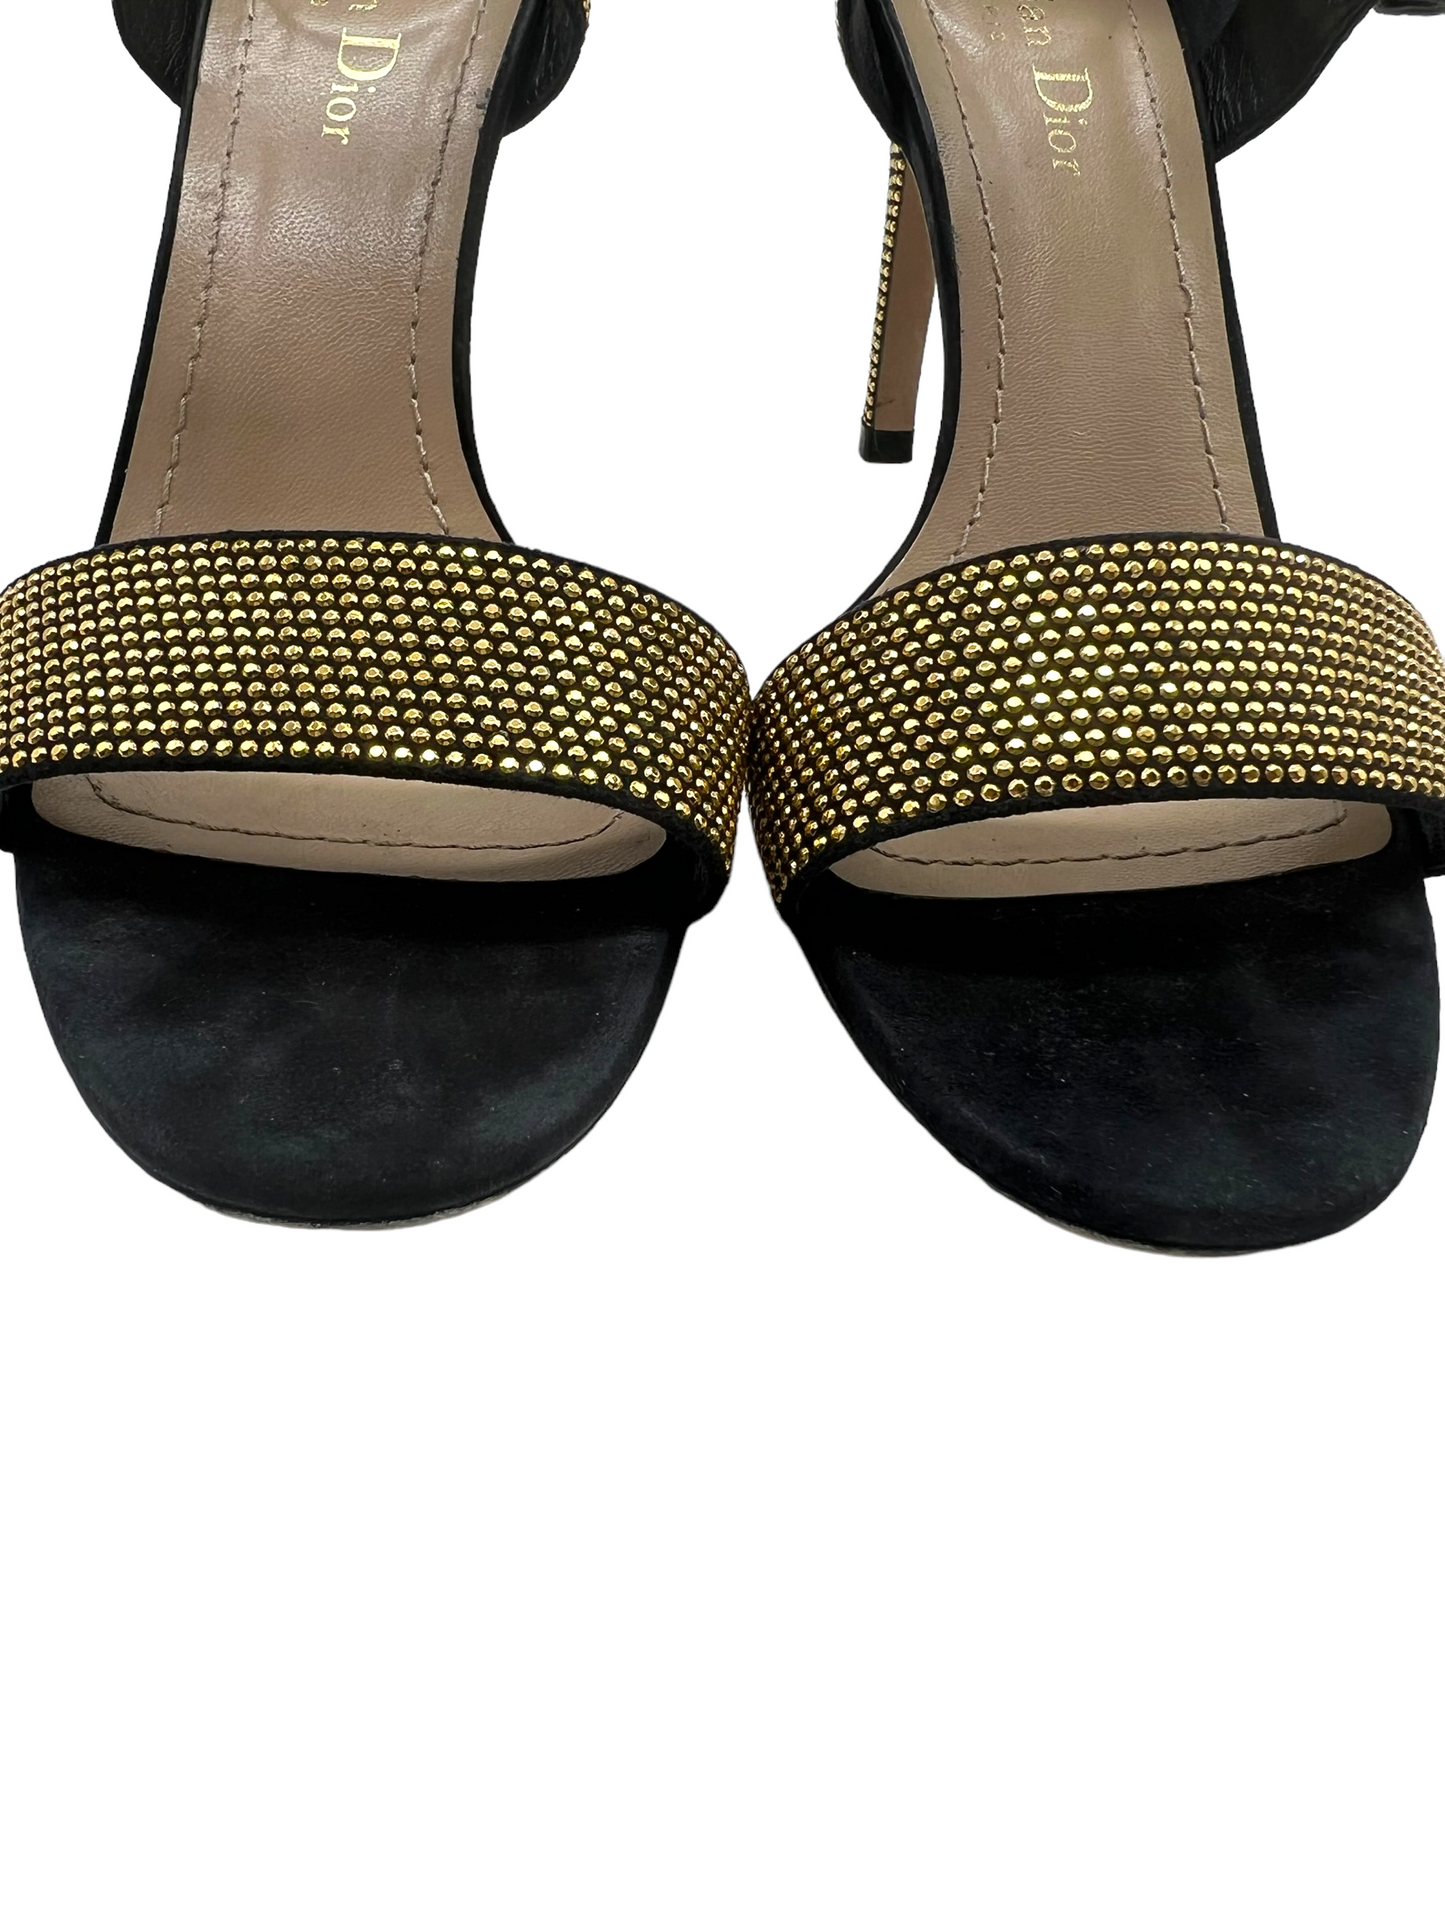 Dior Gold Studded Double Strap Size 38 Heels